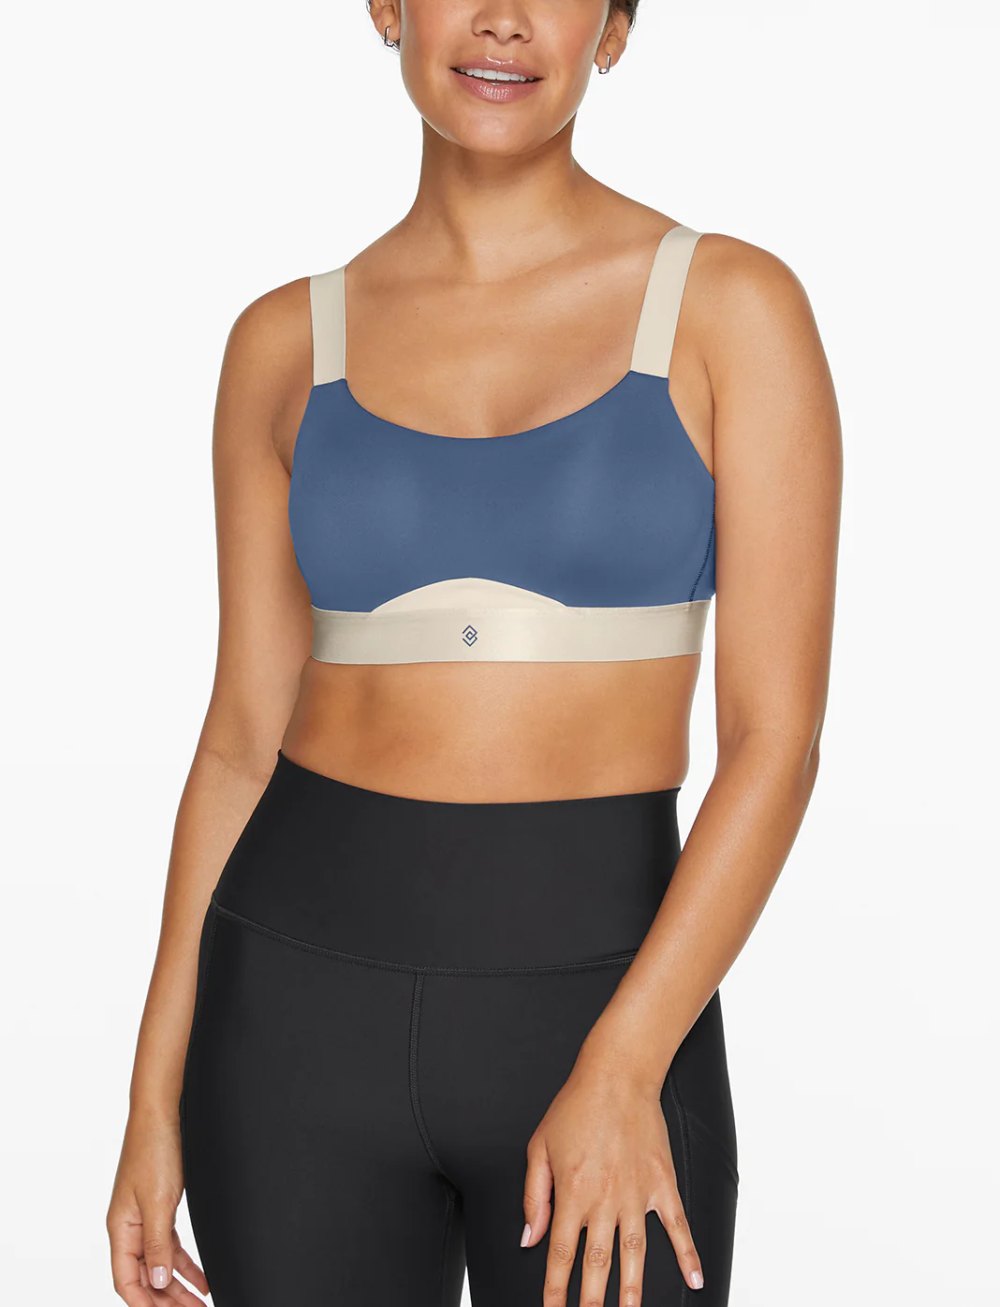 Top 5 Sports Bras for Large Busts: Reviews – SportsBra